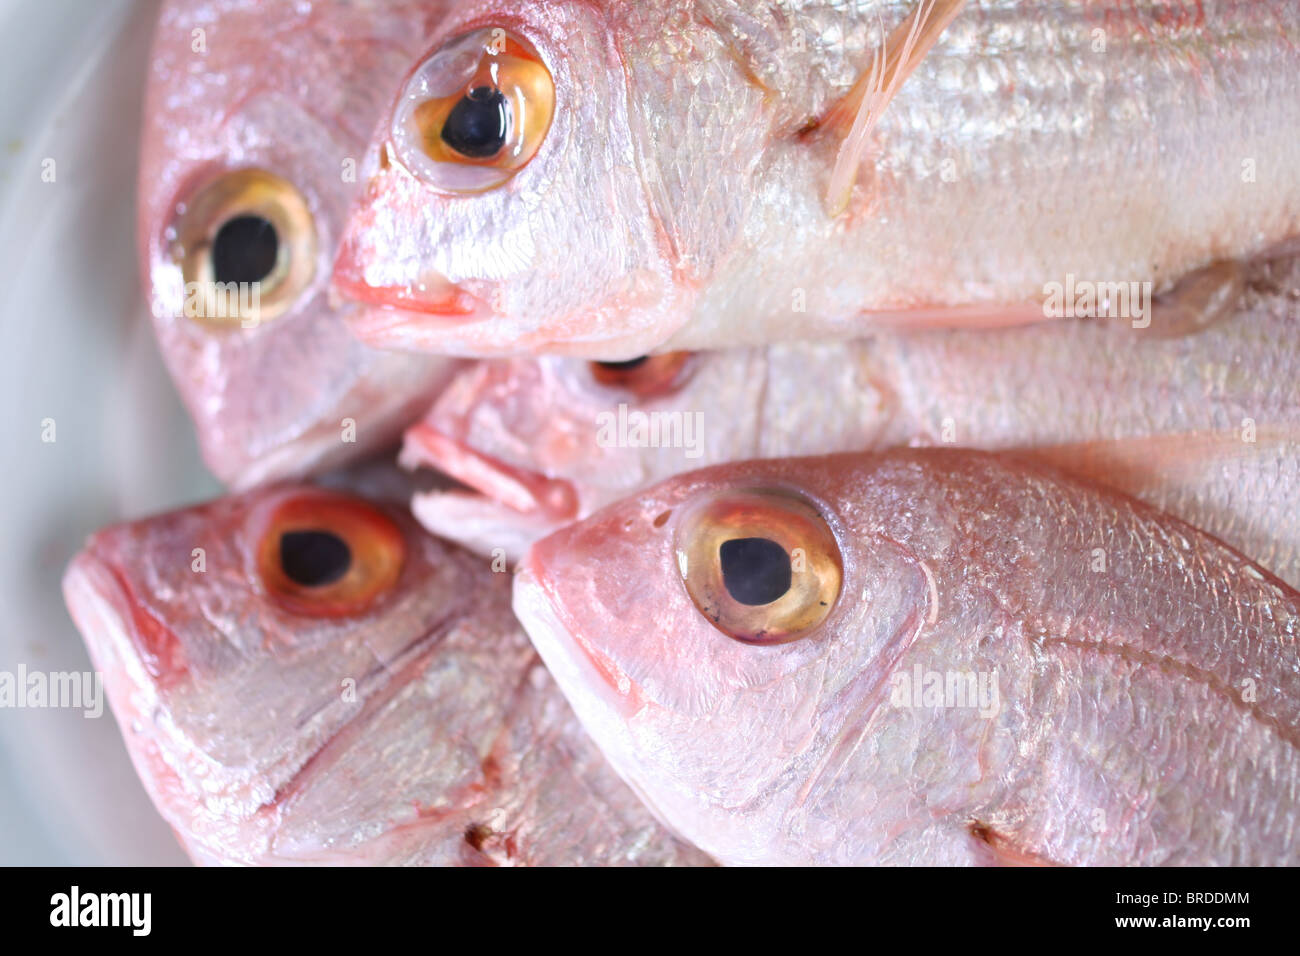 Details of raw fresh fish at the market, close-up Stock Photo